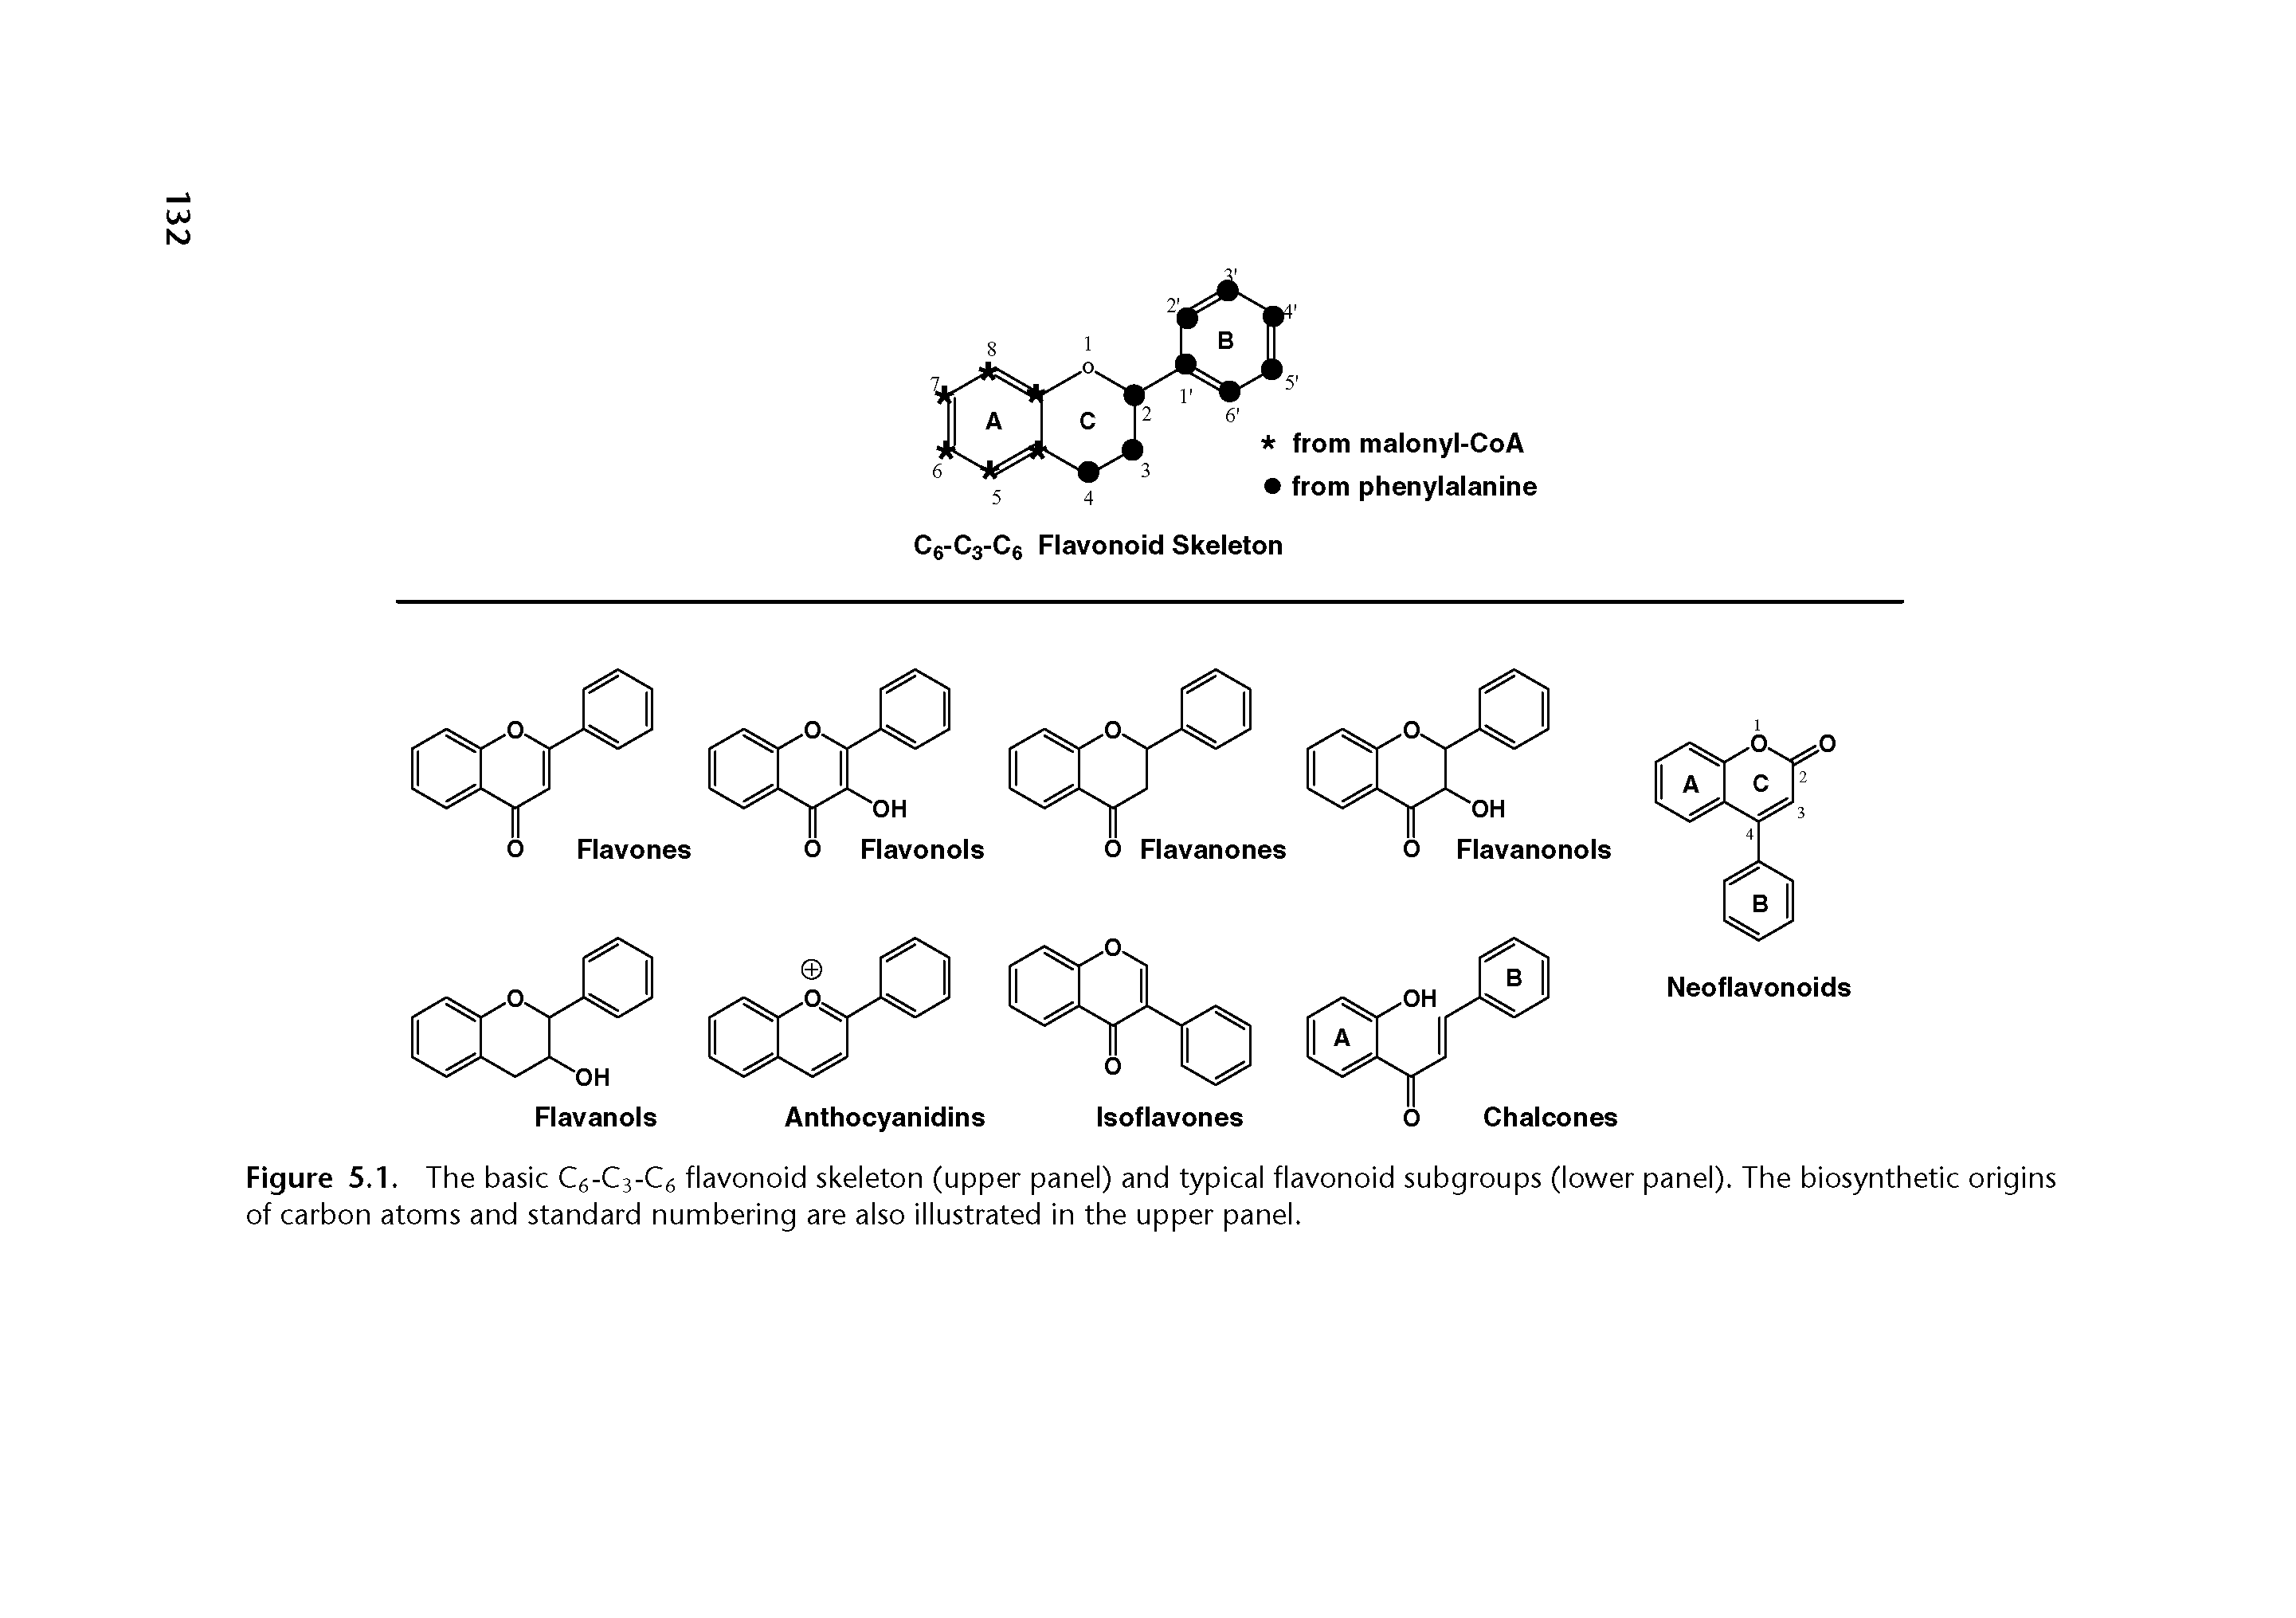 Figure 5.1. The basic C6-C3-C6 flavonoid skeleton (upper panel) and typical flavonoid subgroups (lower panel). The biosynthetic origins of carbon atoms and standard numbering are also illustrated in the upper panel.